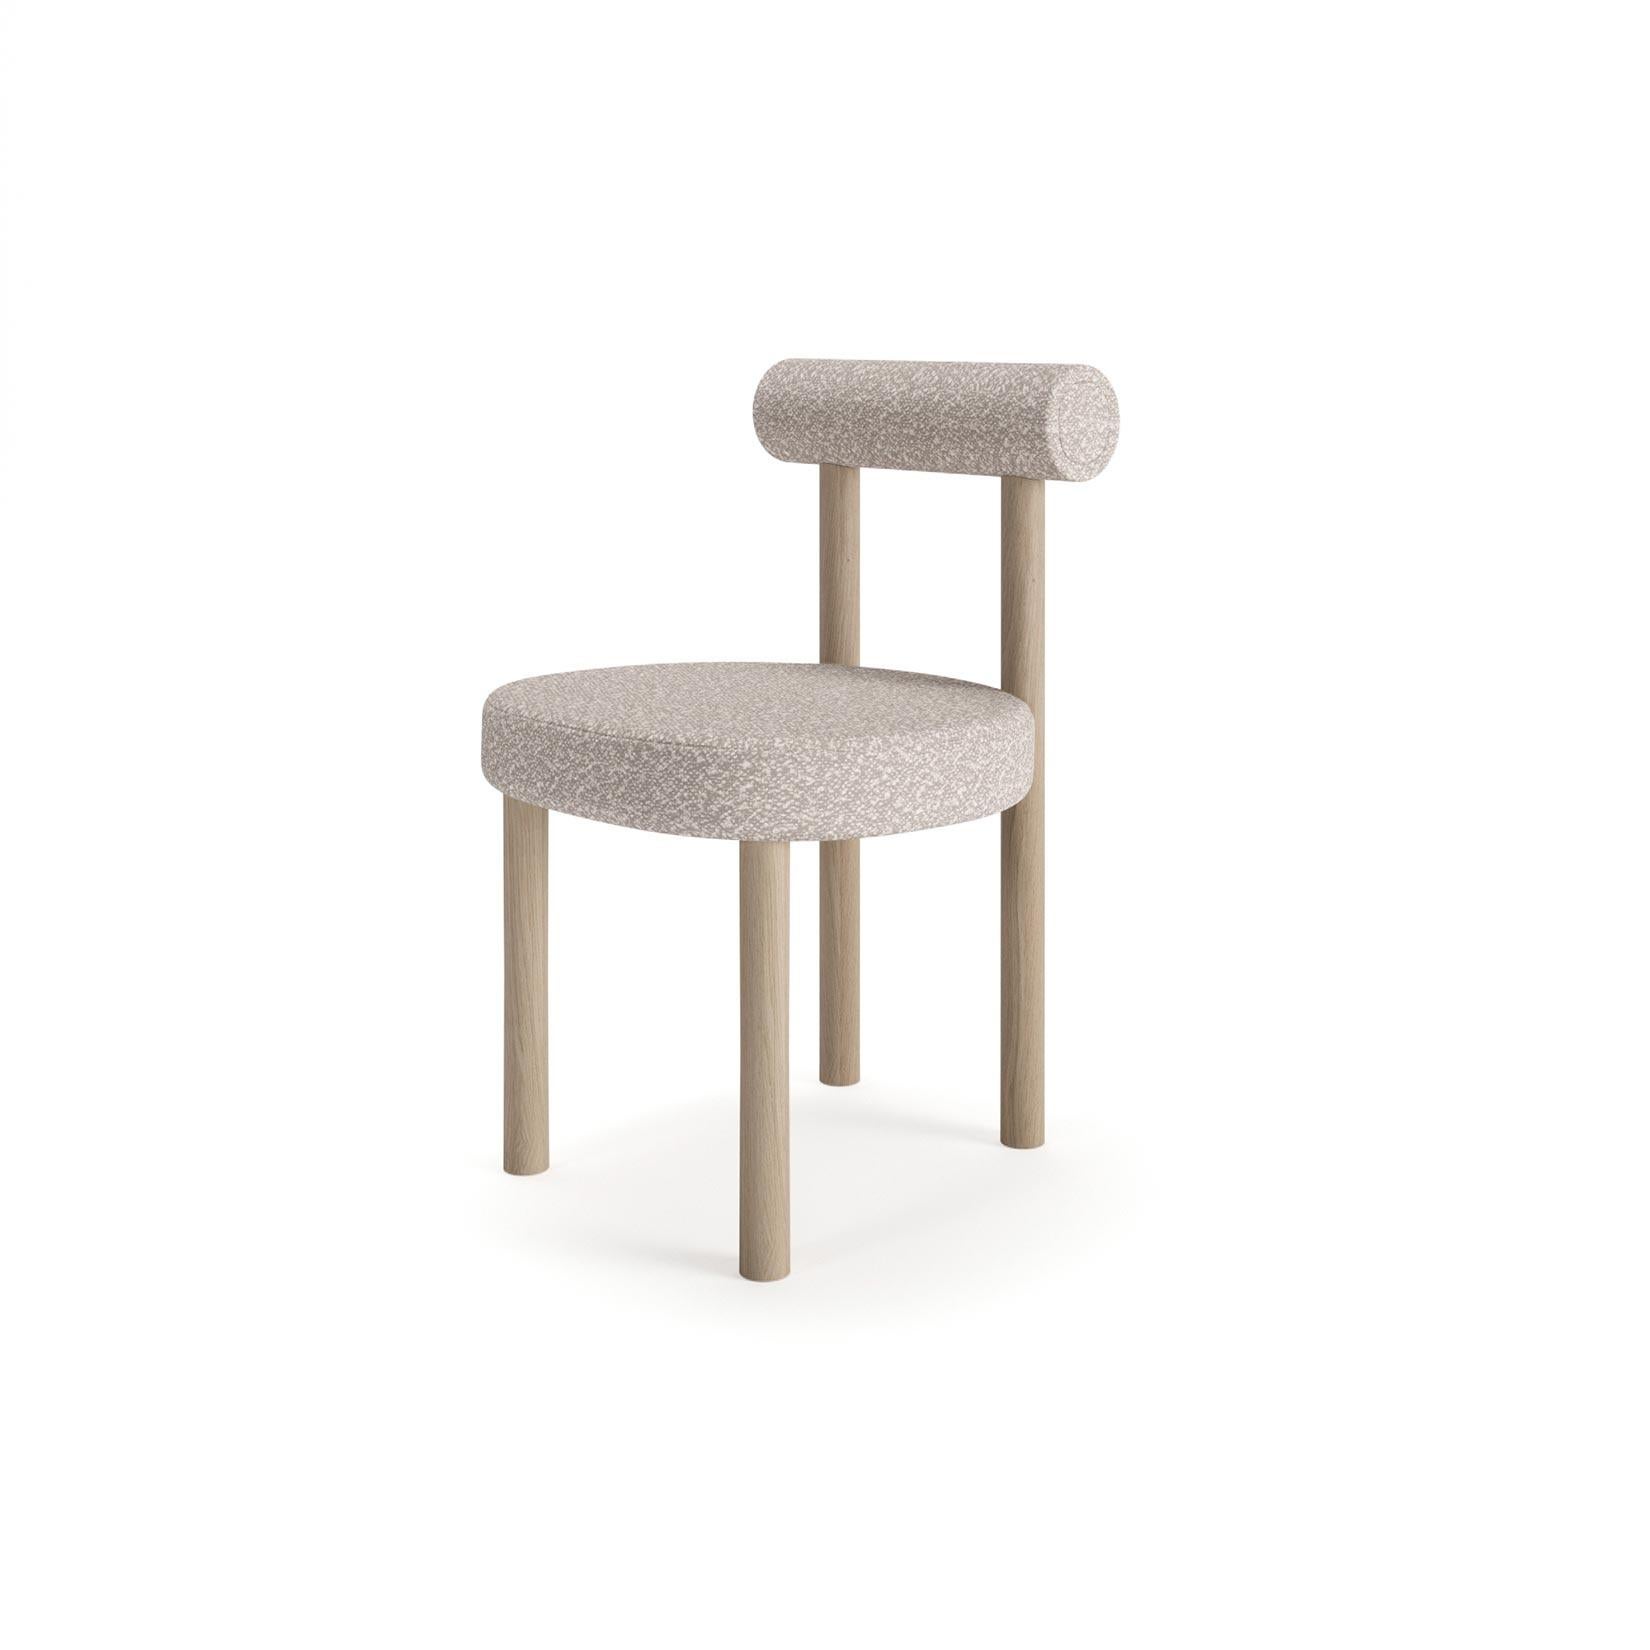 Woodland Ash and Beech Chair w/ Upholstered Seat and Back Roll - Darker Color.

Lid: 
22mm medium density fiberboard in 50mm solid oak frame

Structure: 
19mm Medium density fiberboard: girdles, lid, bottom
6mm Medium density fiberboard: